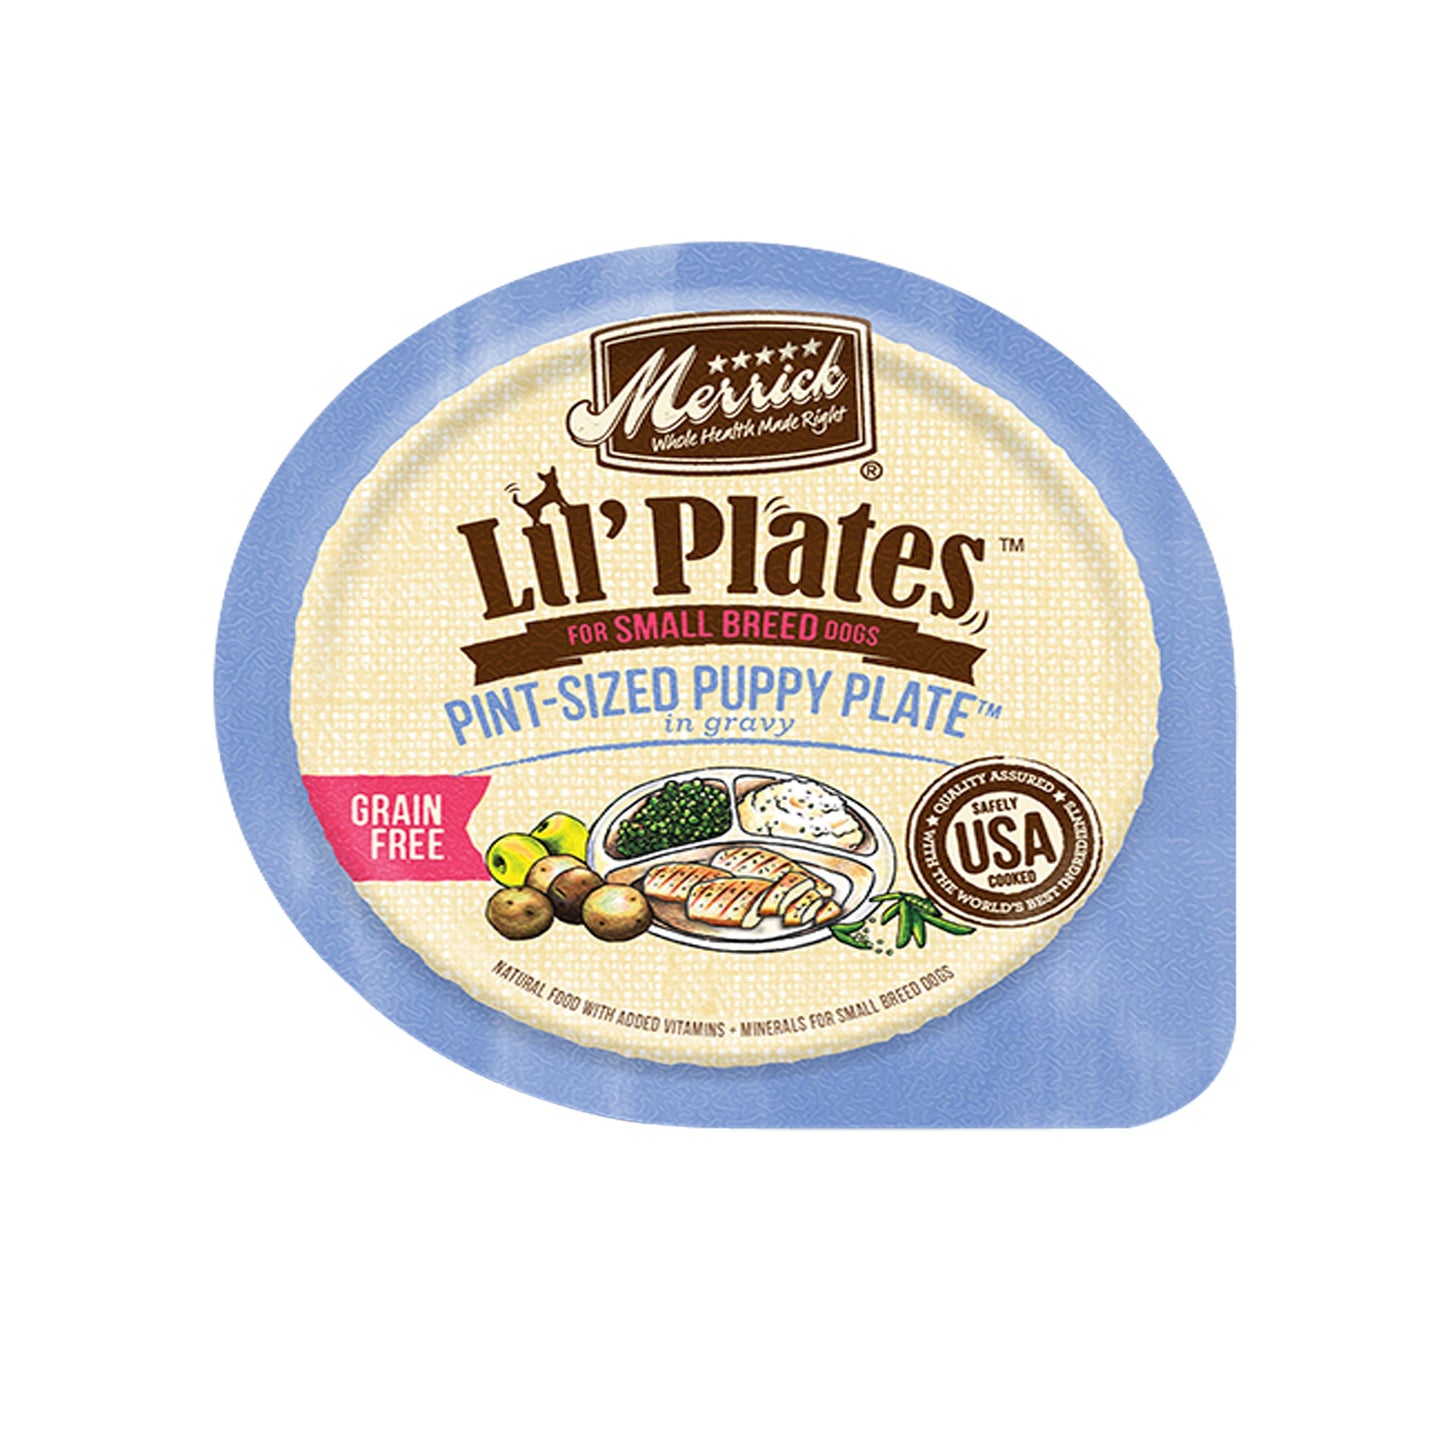 Merrick Lil Plates Grain Free Pint-Sized Puppy Plate In Gravy Dog Food 3.5oz. (Case of 12)